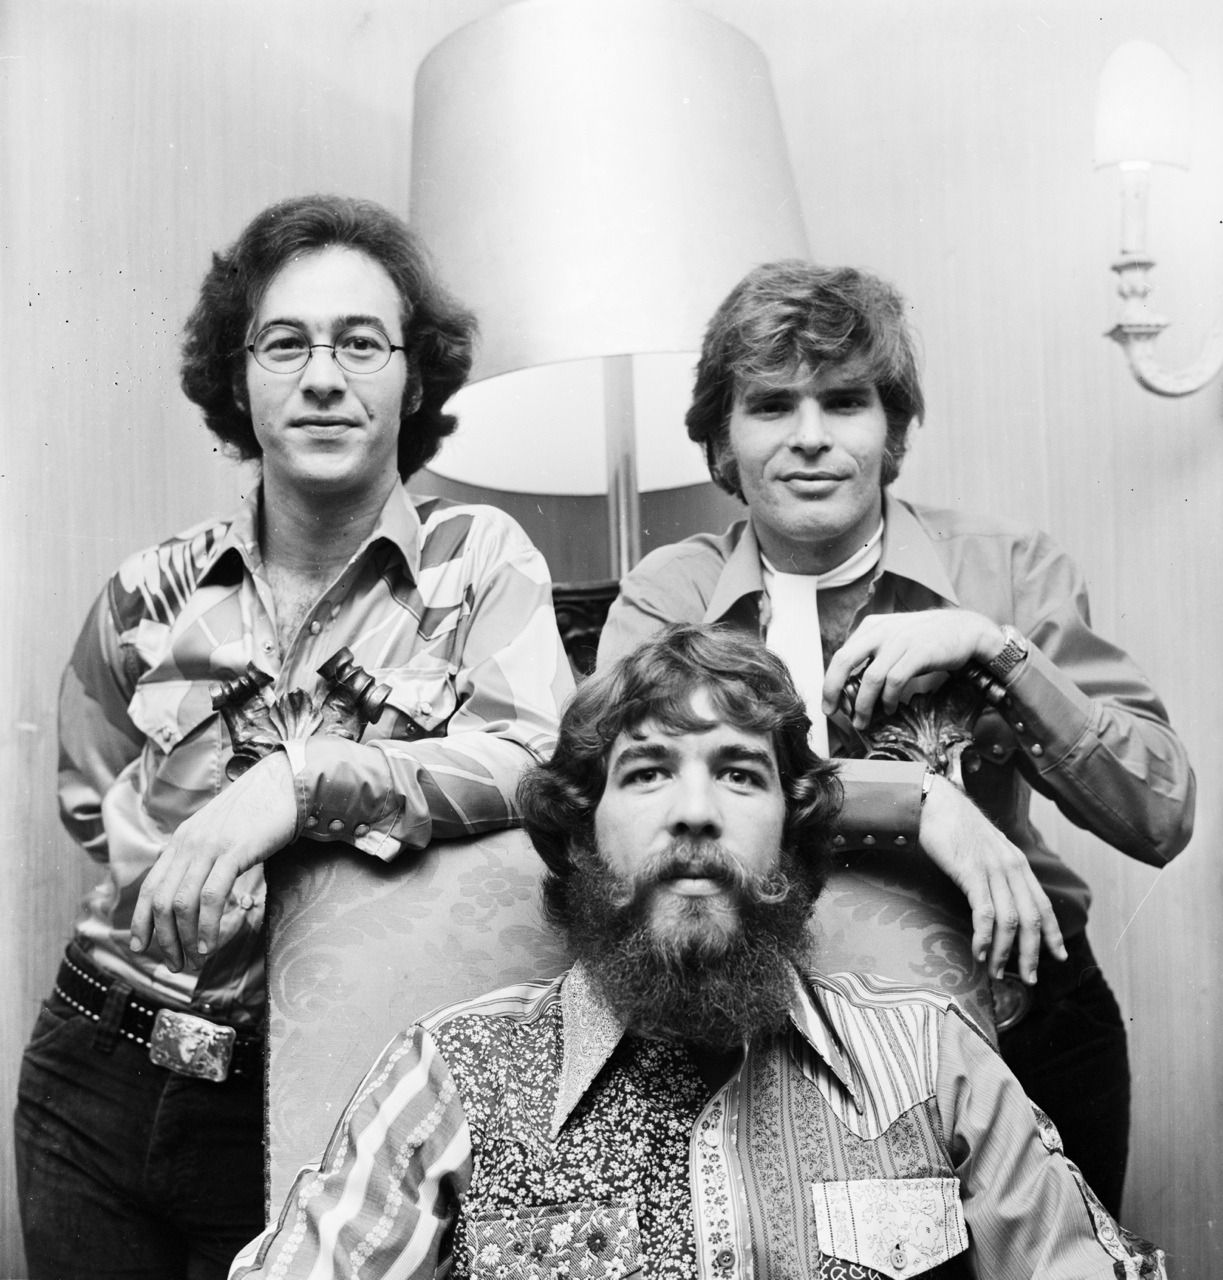 Credence Clearwater Revival.